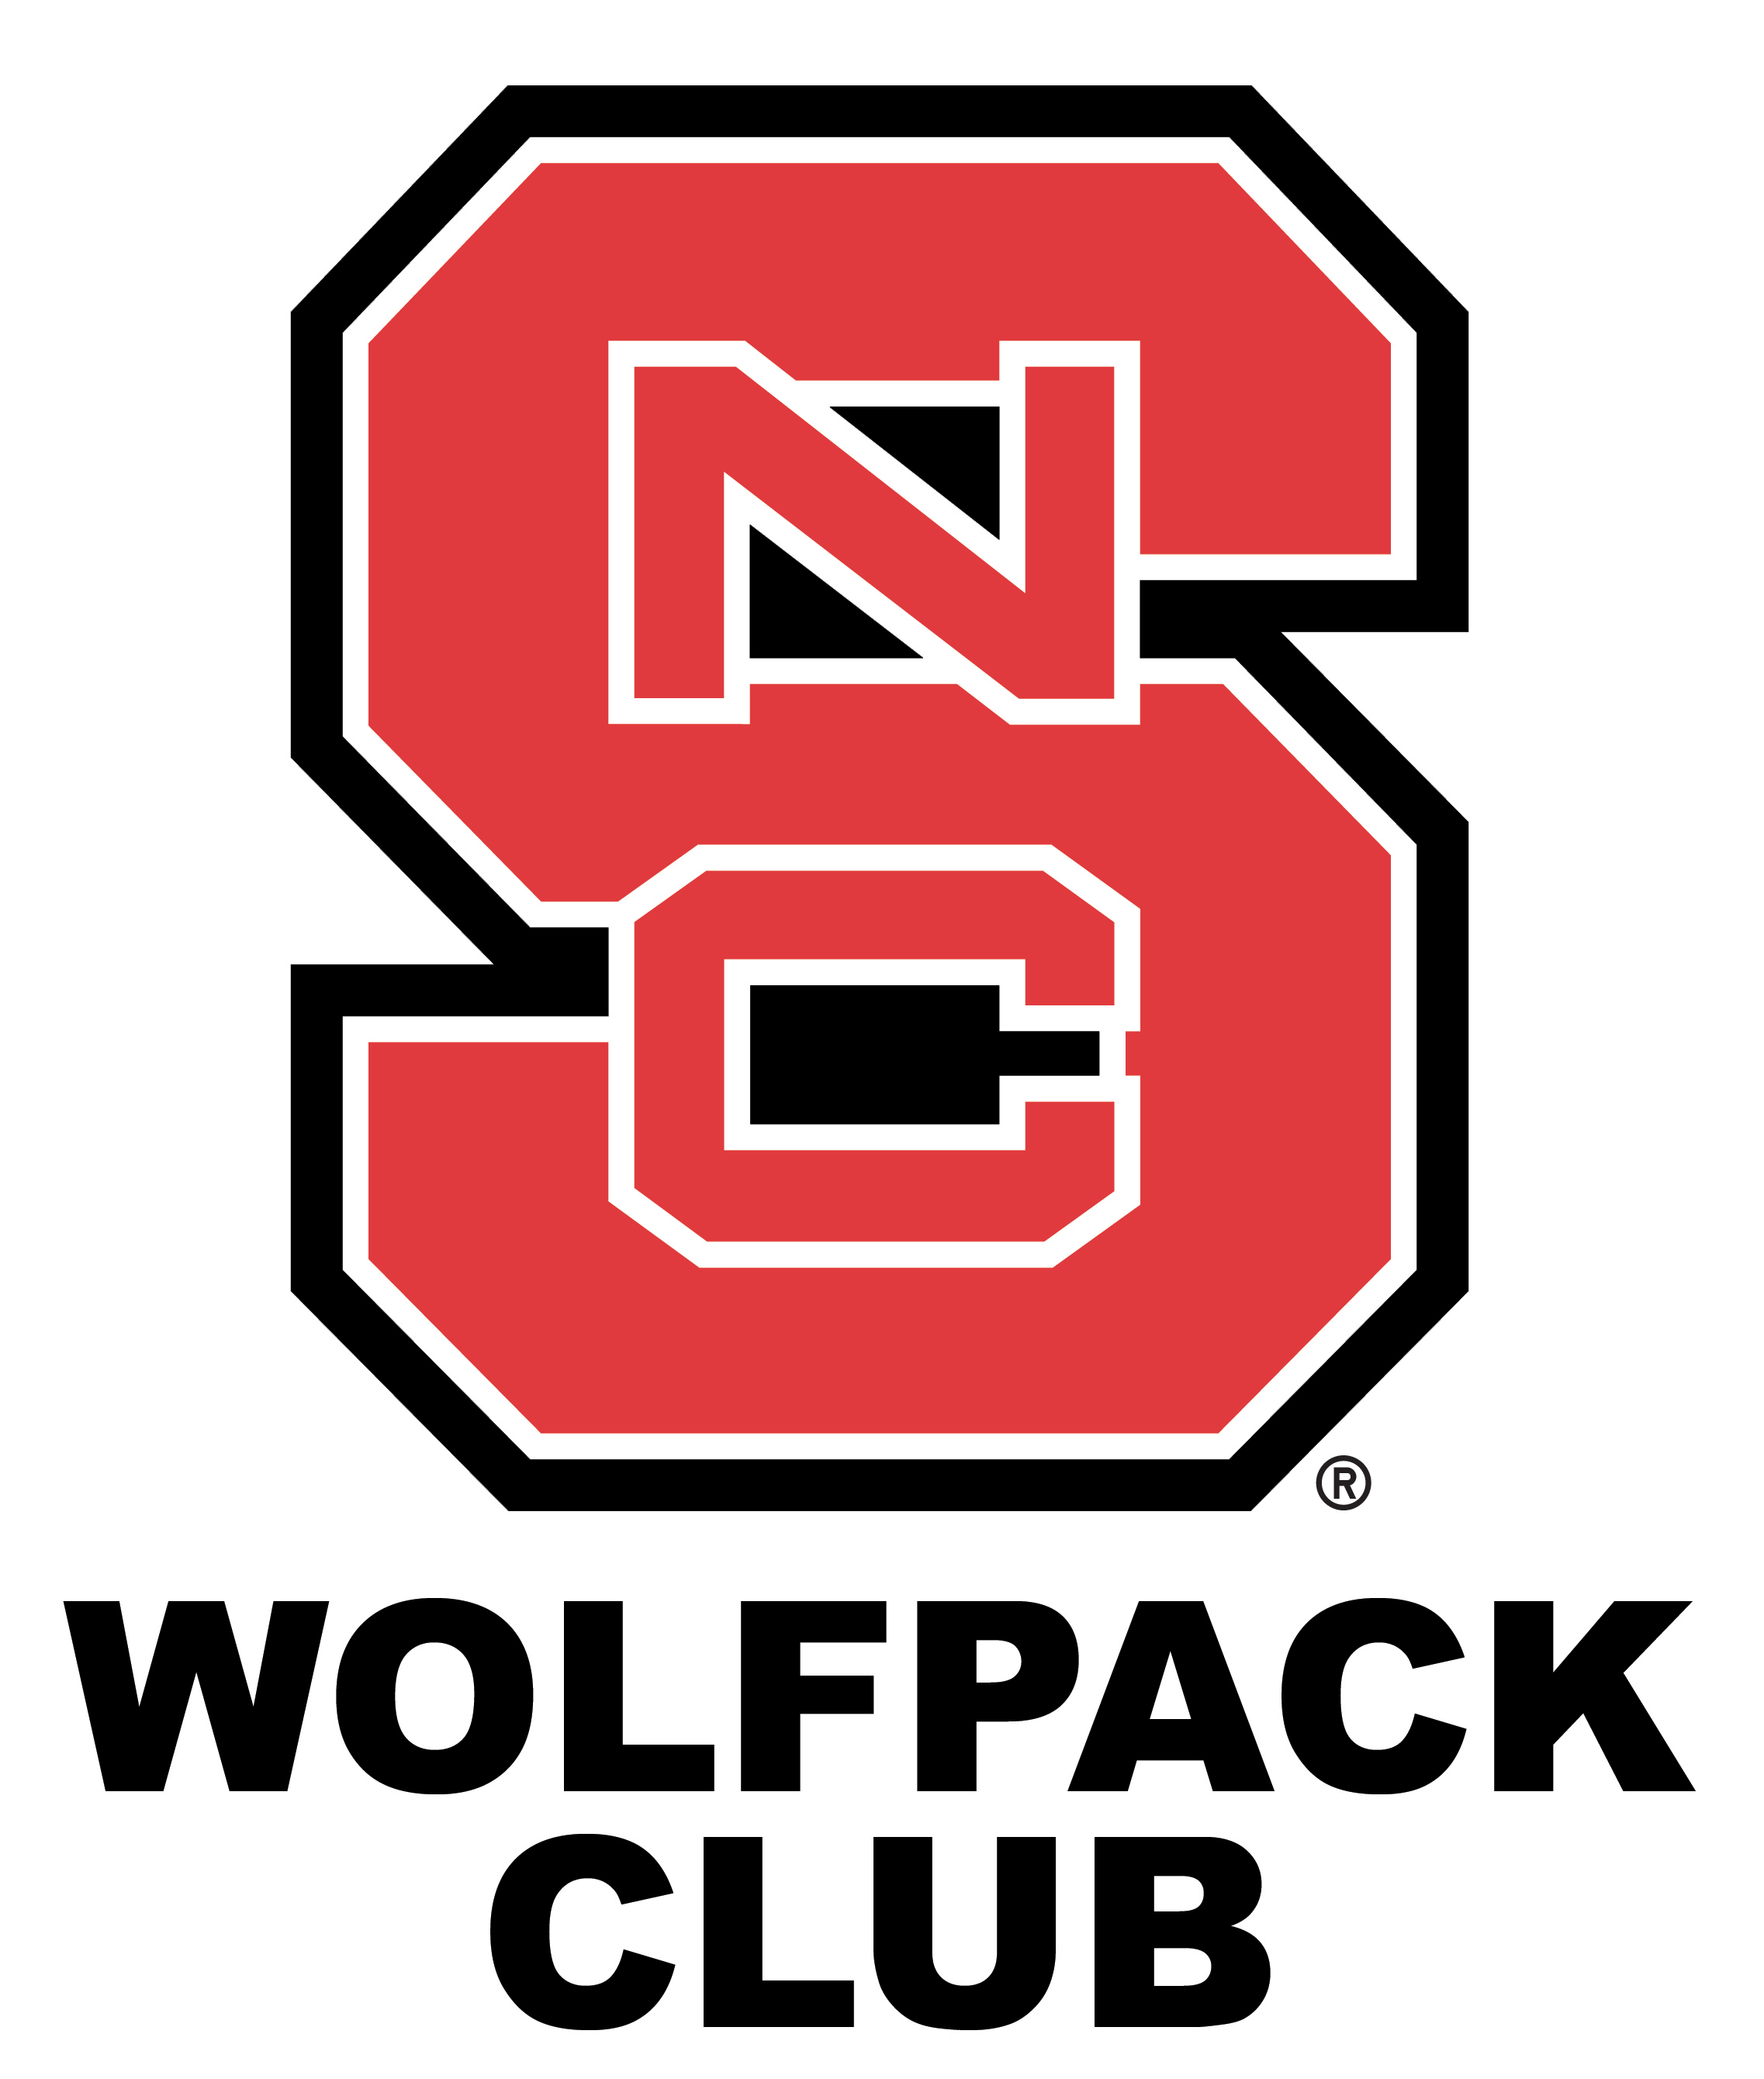 https://www.westraleighbaseball.org/wp-content/uploads/sites/2684/2022/01/Wolfpack-Club-logo.png